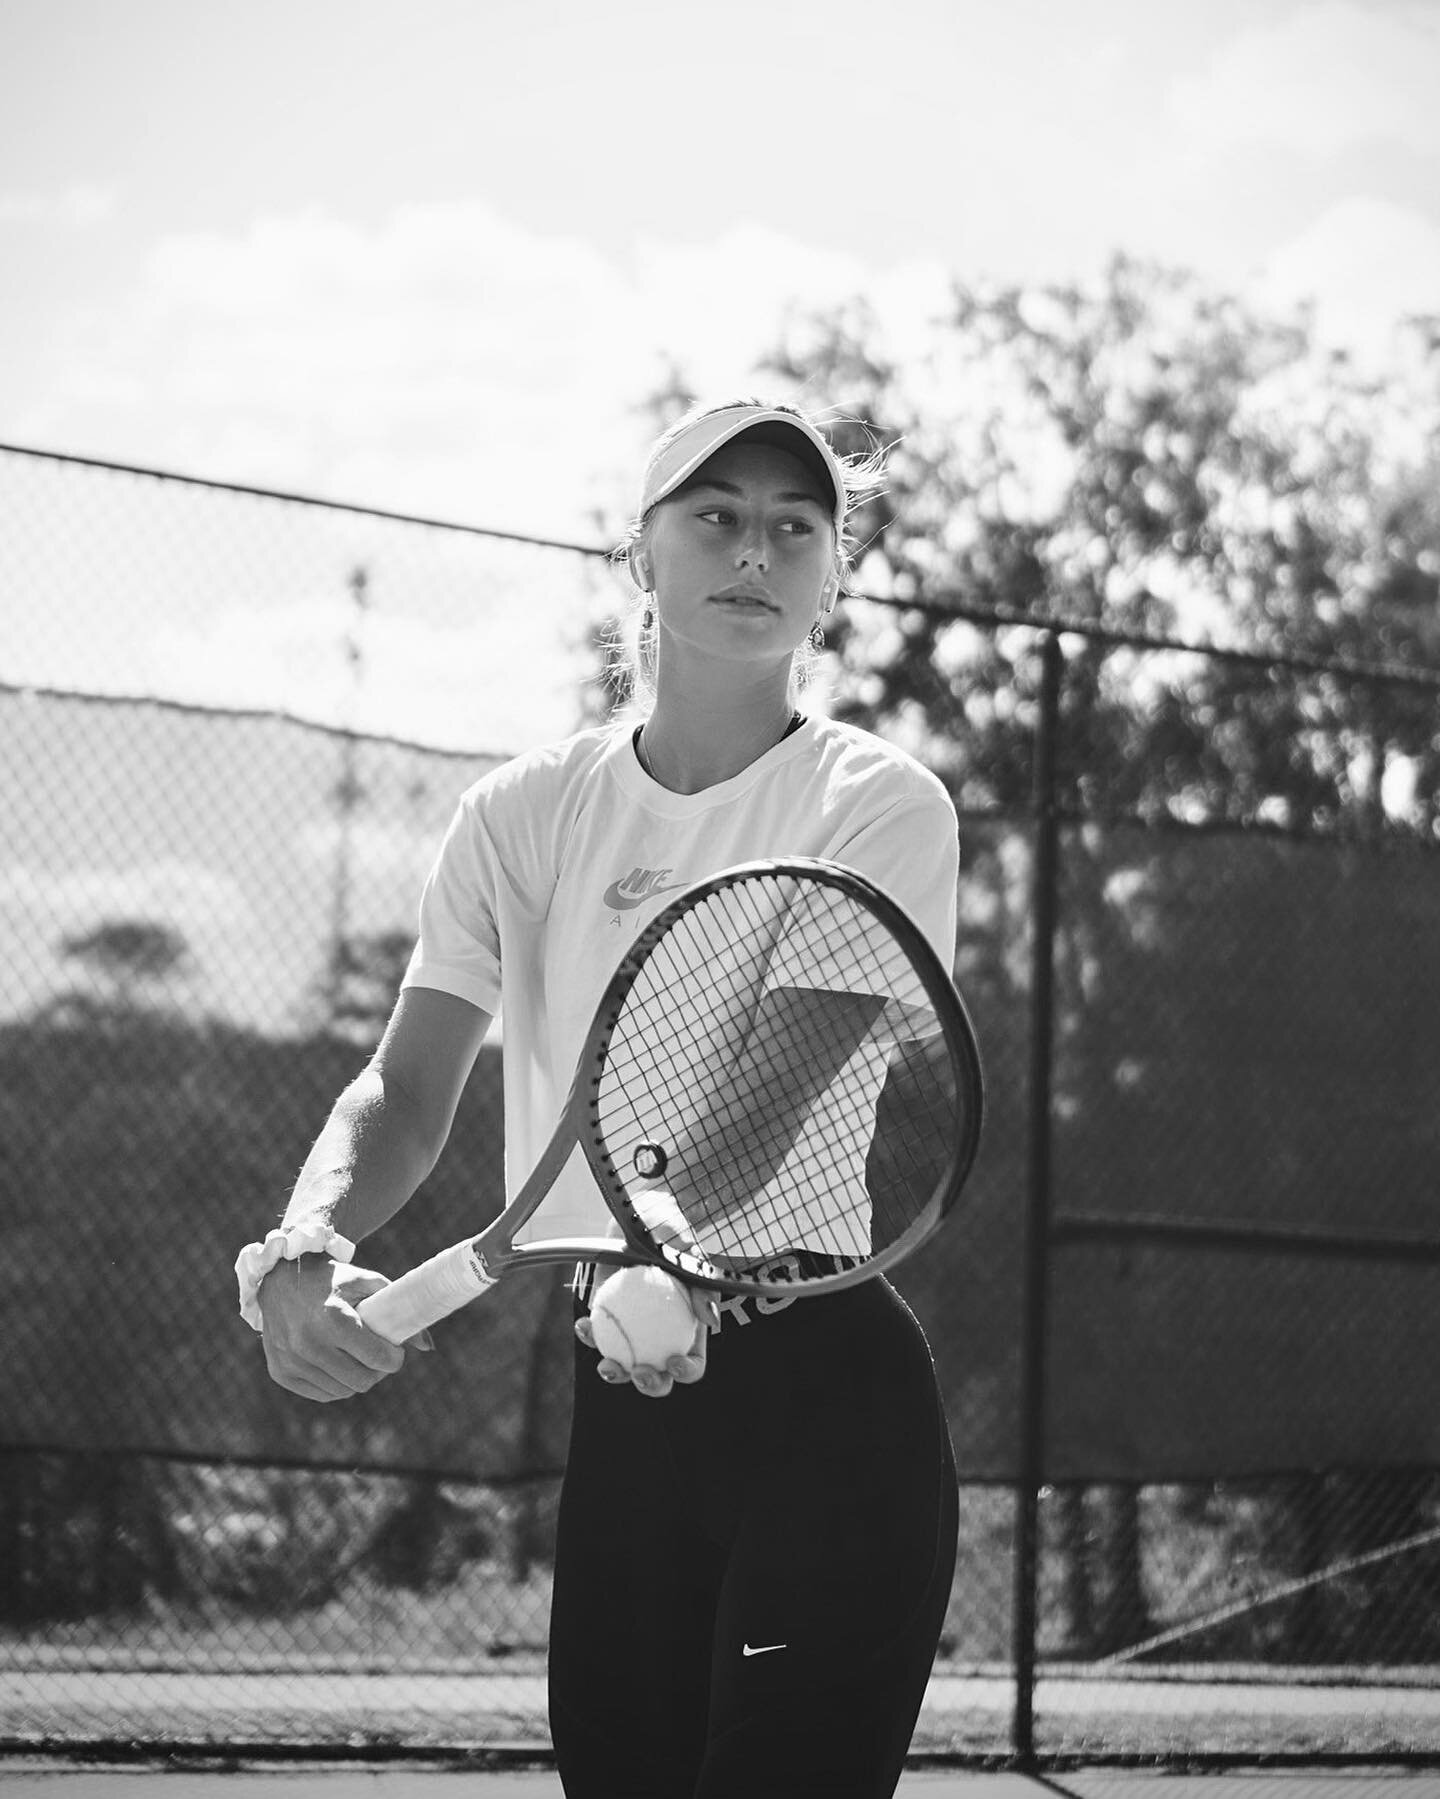 &quot;Watching woman's sport allows young people to aspire at the sport of their choice. We have improved so much in the world with gender equality, especially in tennis. Not only financially but people have respect for women within their sport and w